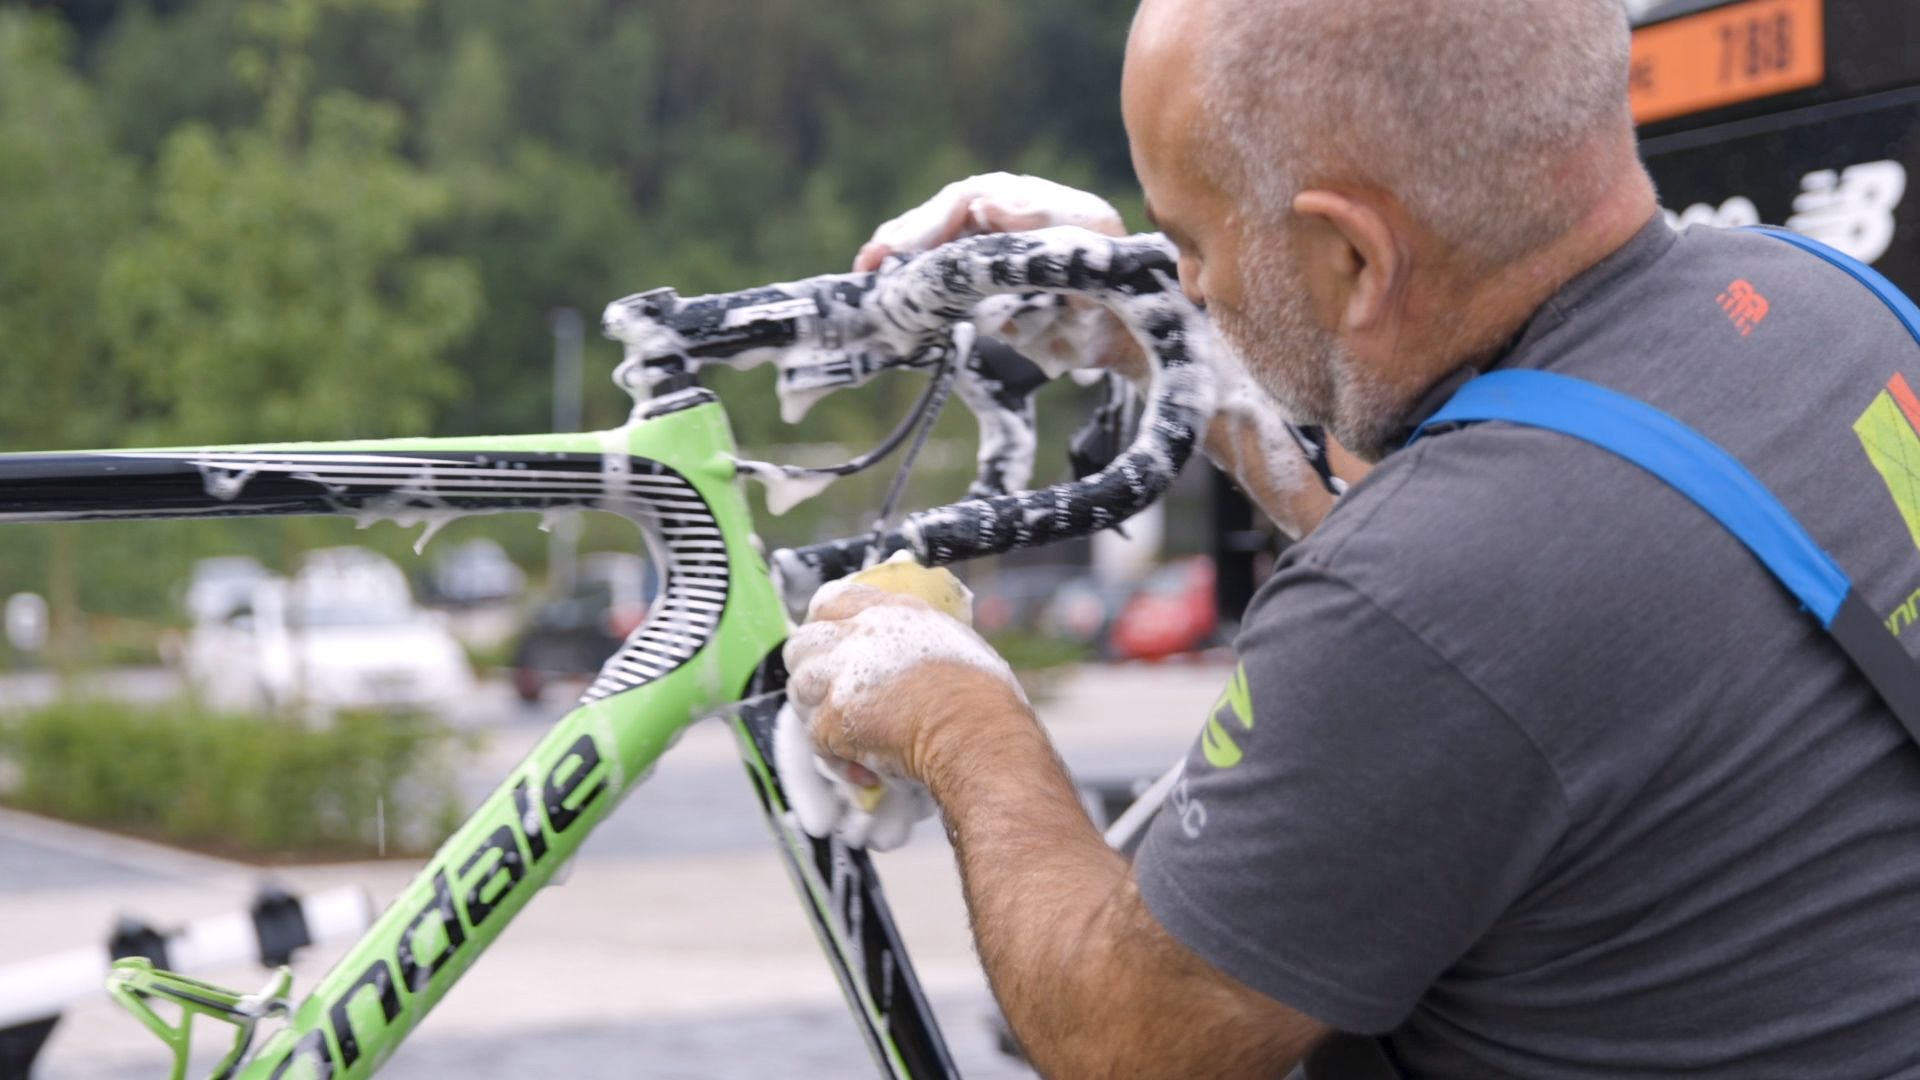 bicycle cleaning service near me